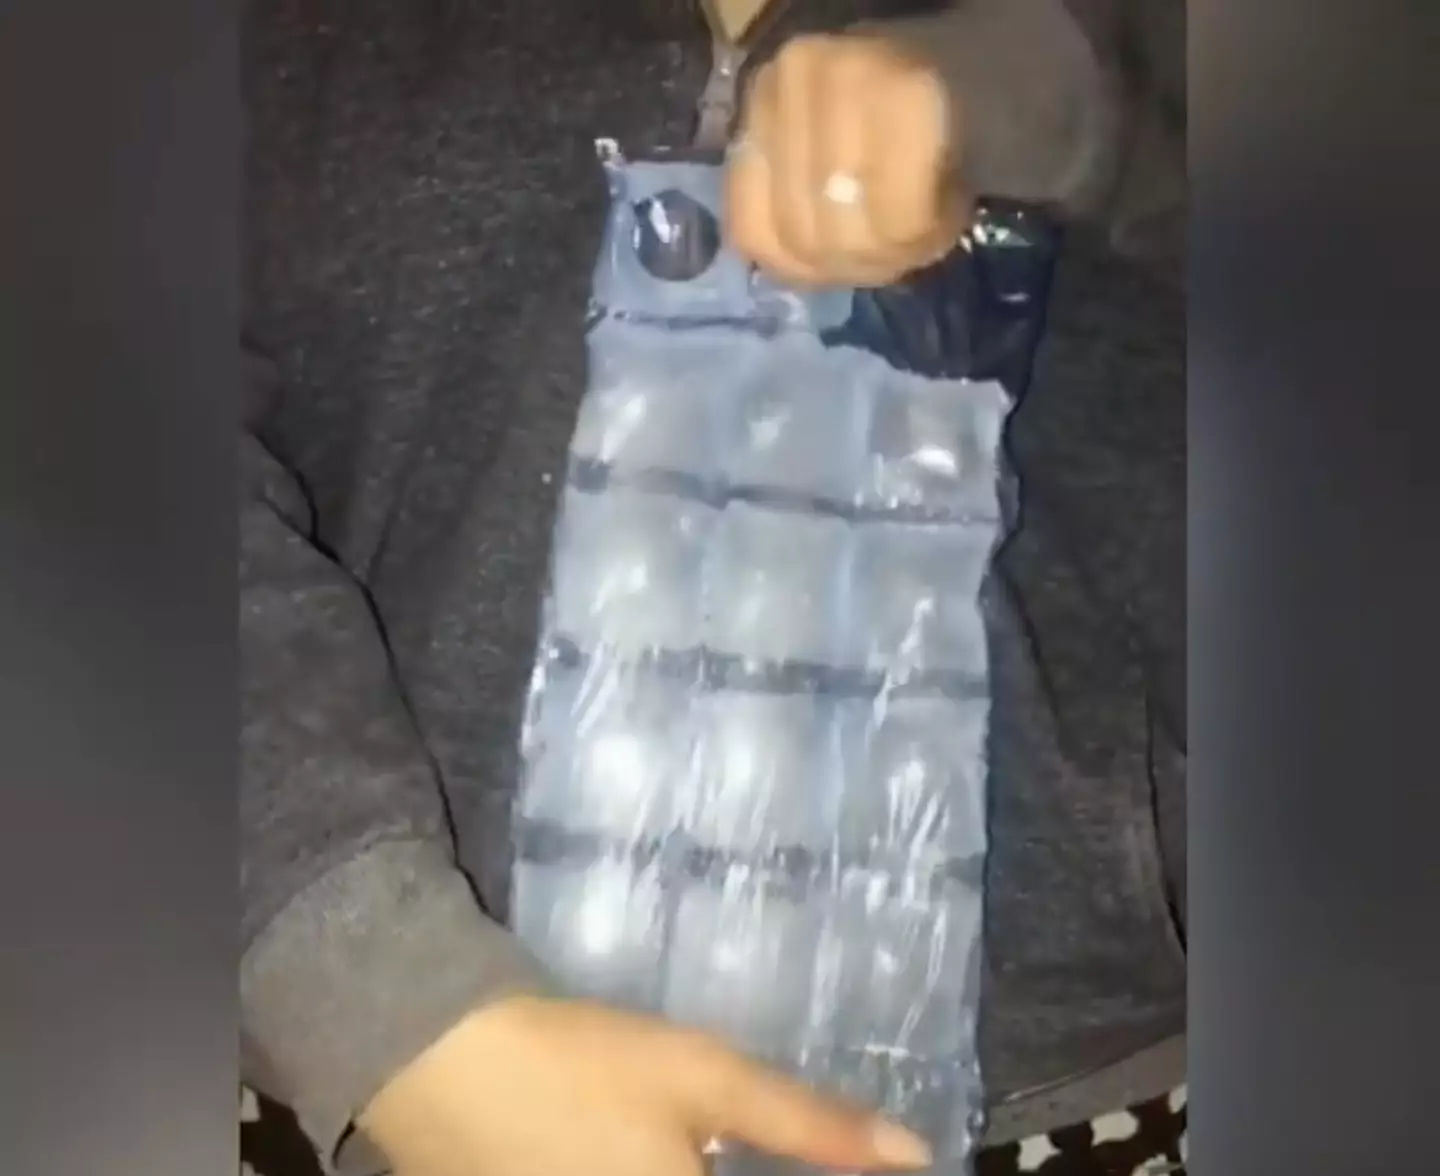 The woman freed the ice cubes by pulling the bag horizontally and vertically (